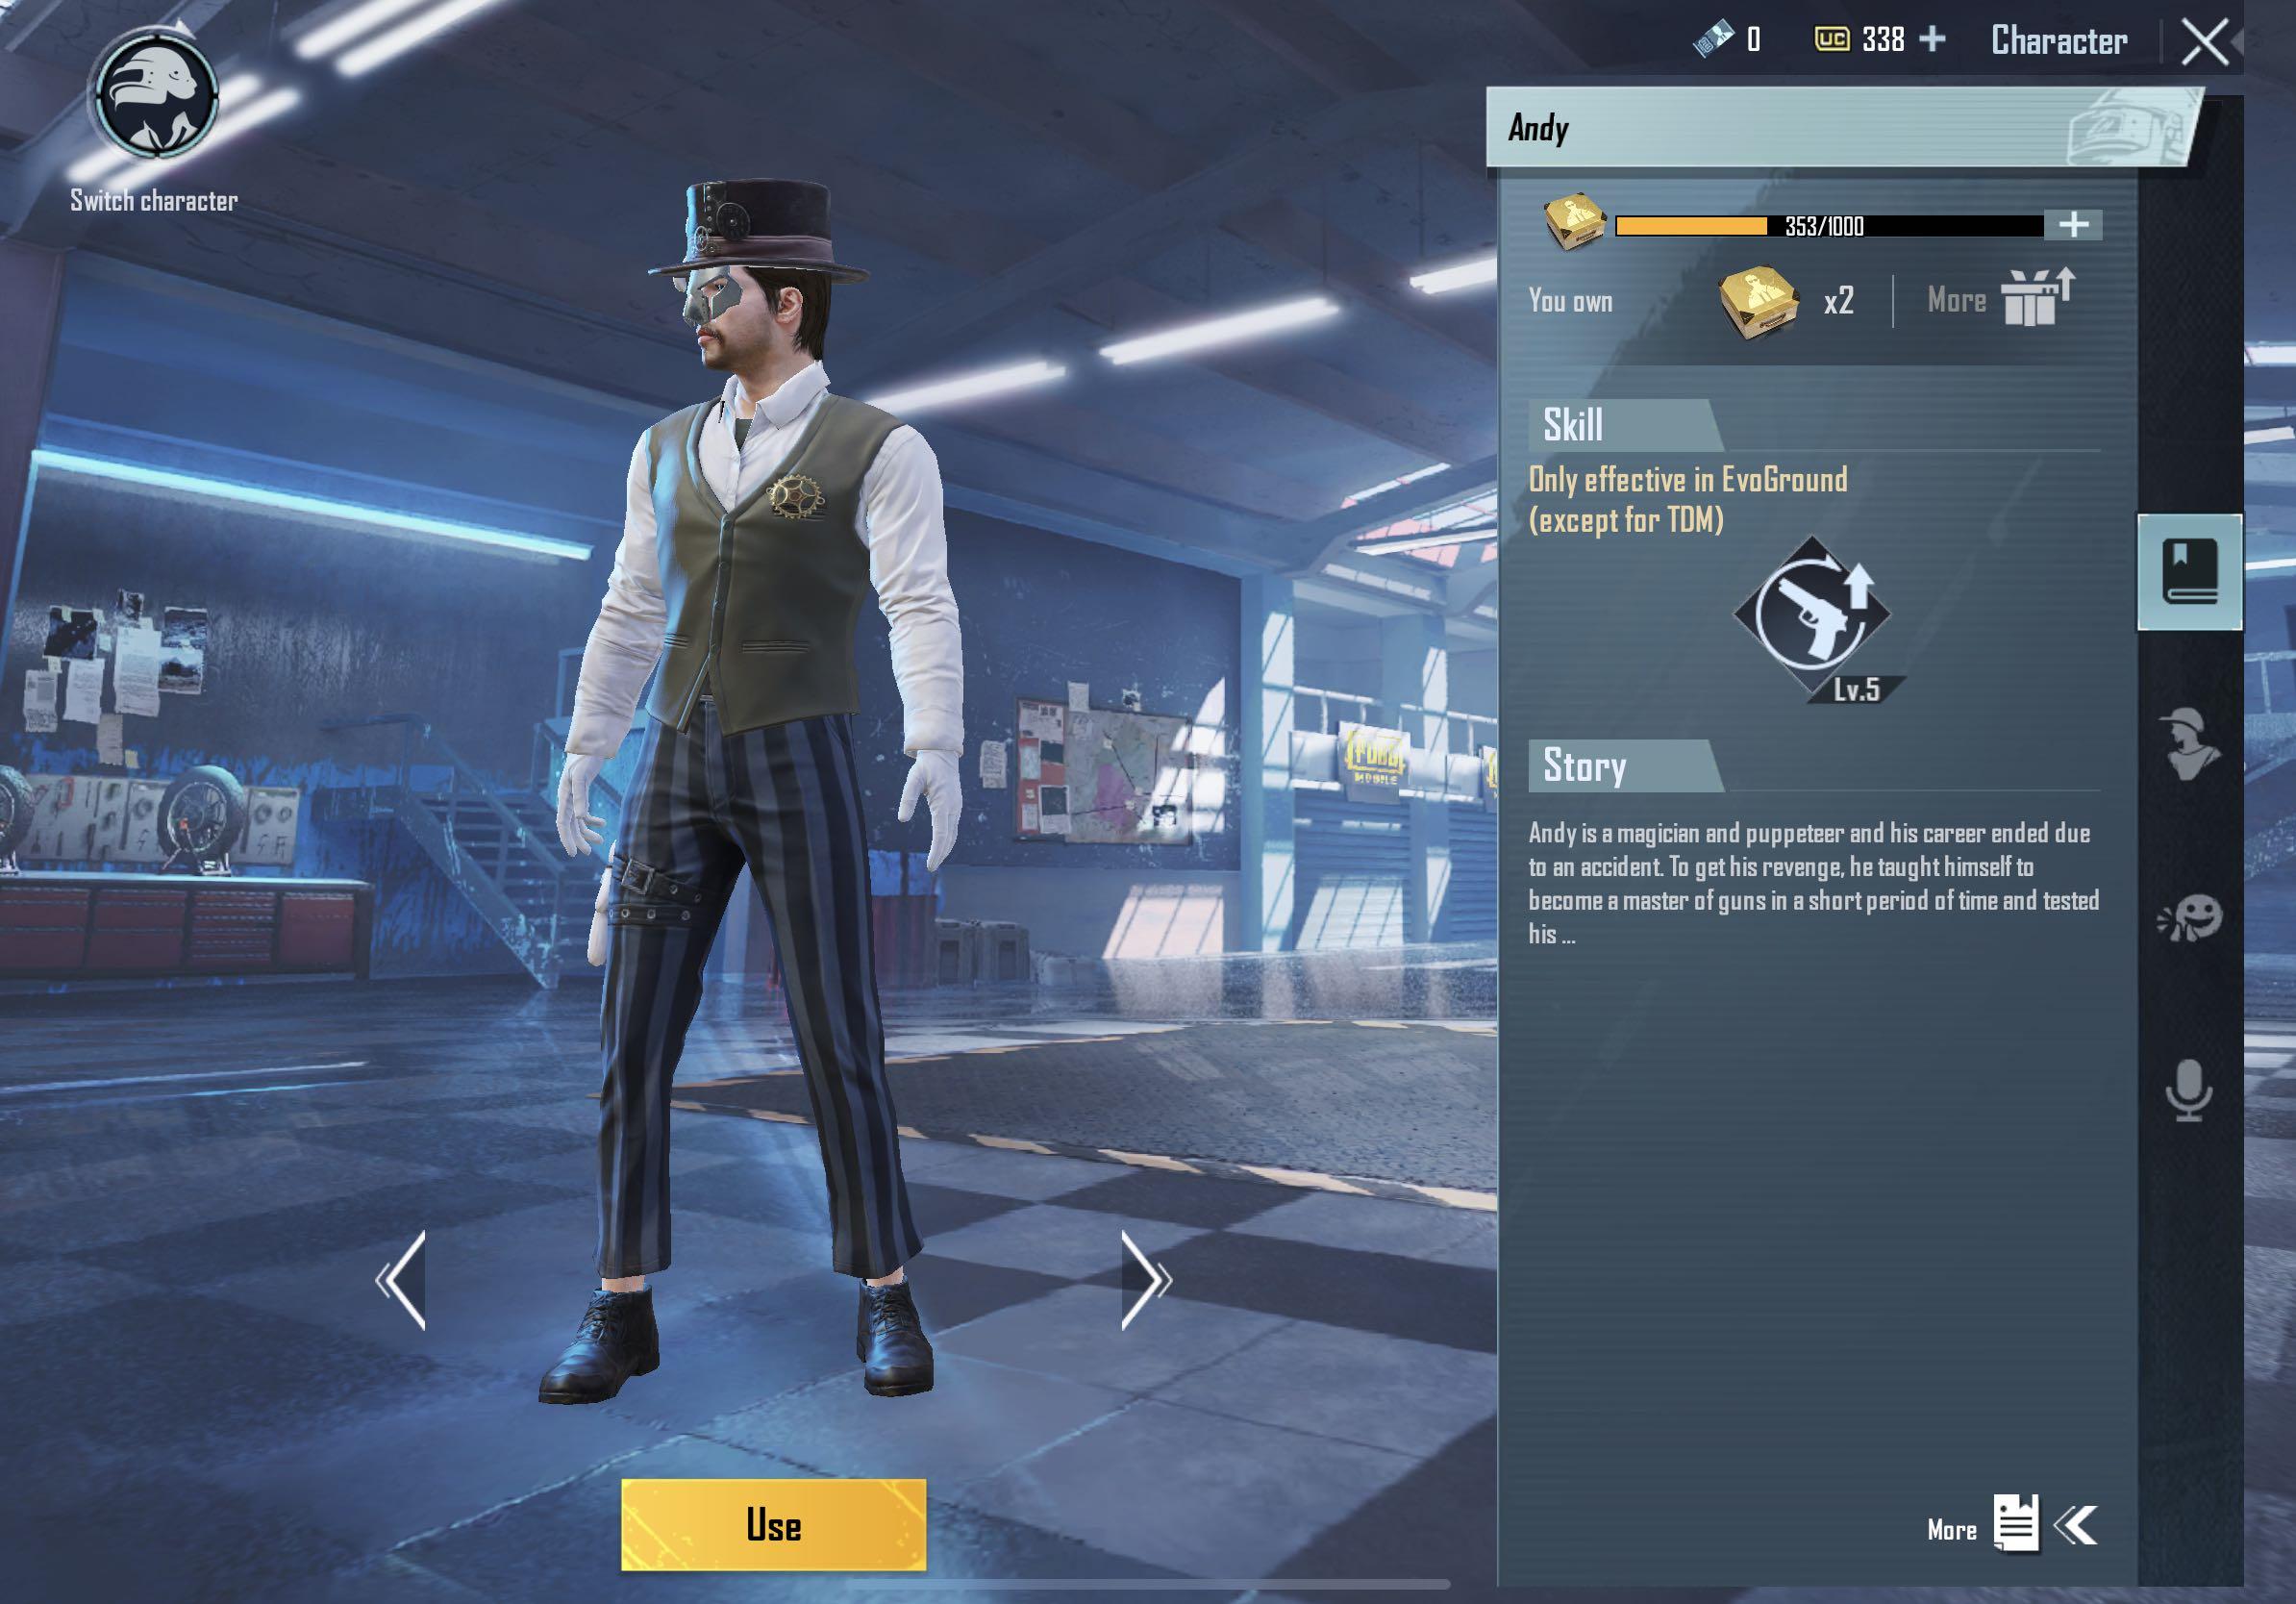 PUBG mobile account level 75, Video Gaming, Gaming Accessories, Game